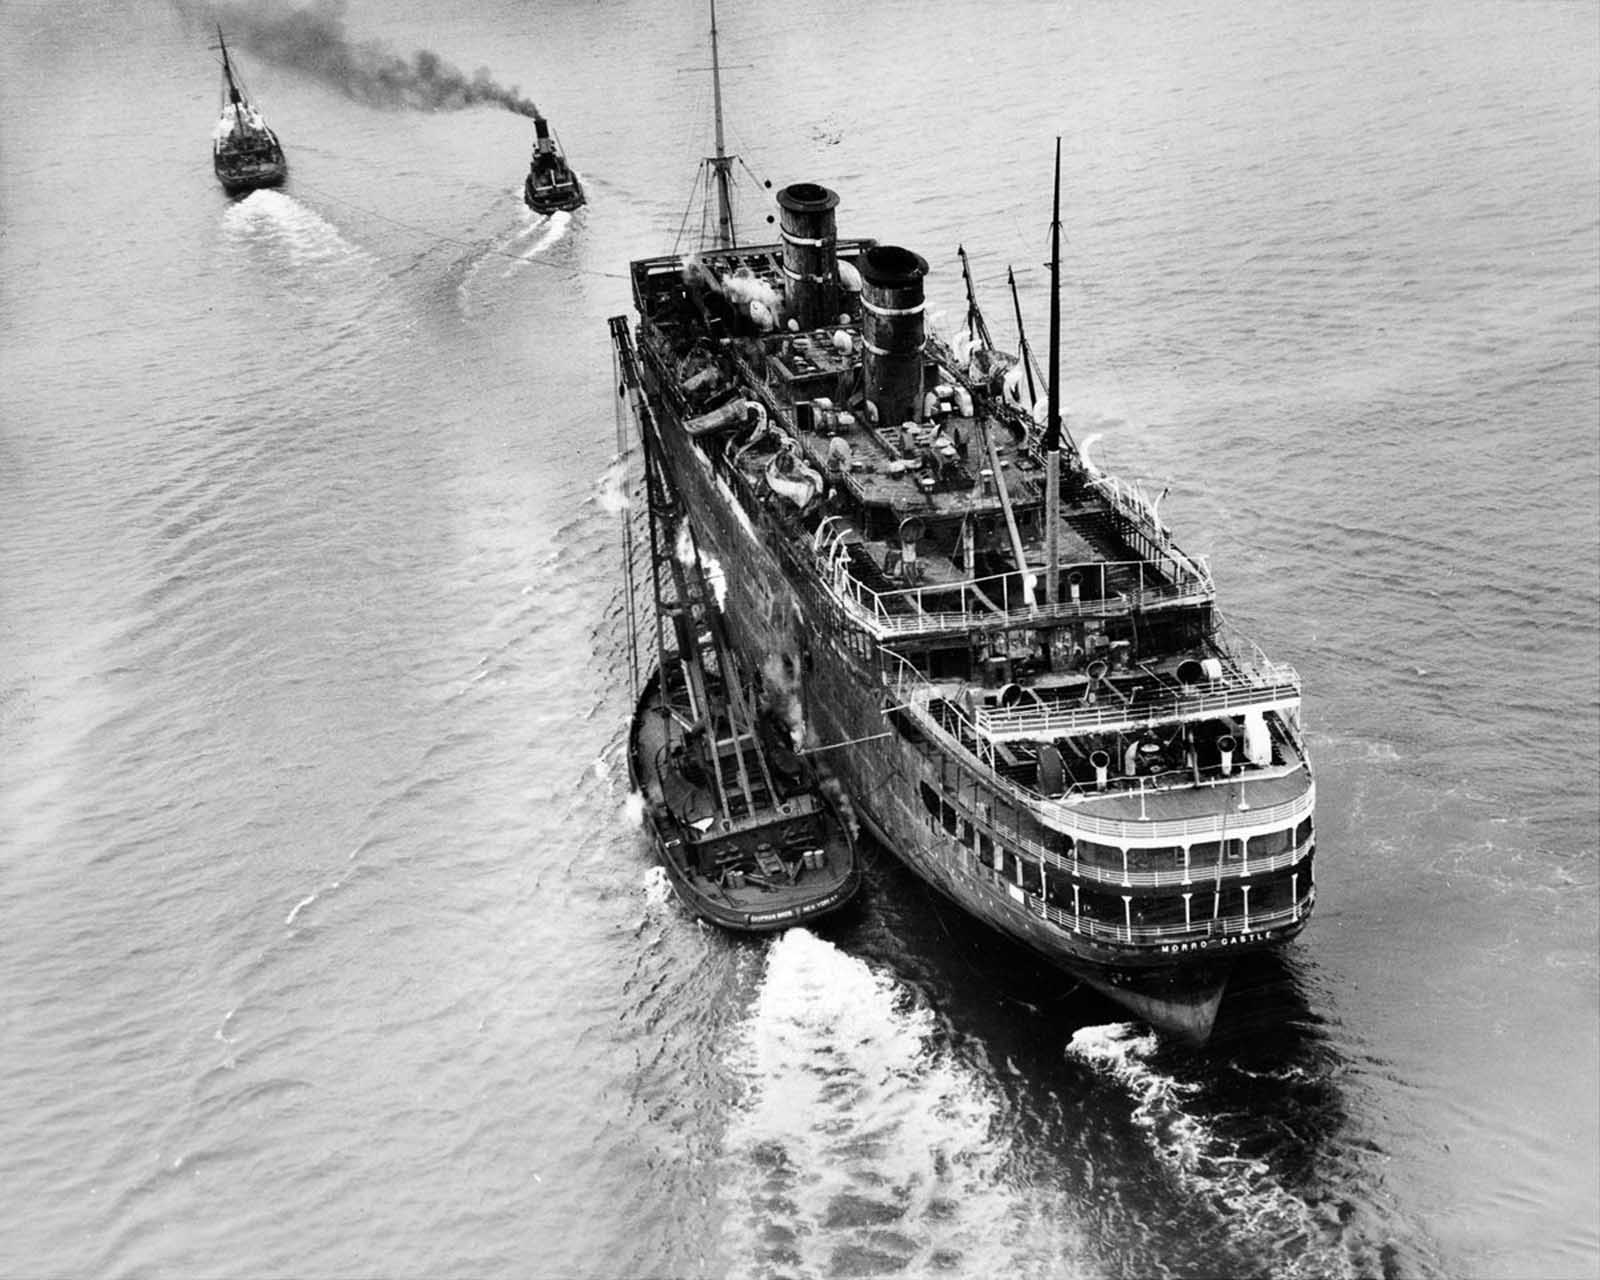 The wreck is towed away to be scrapped, six months after the fire. March 14, 1935.